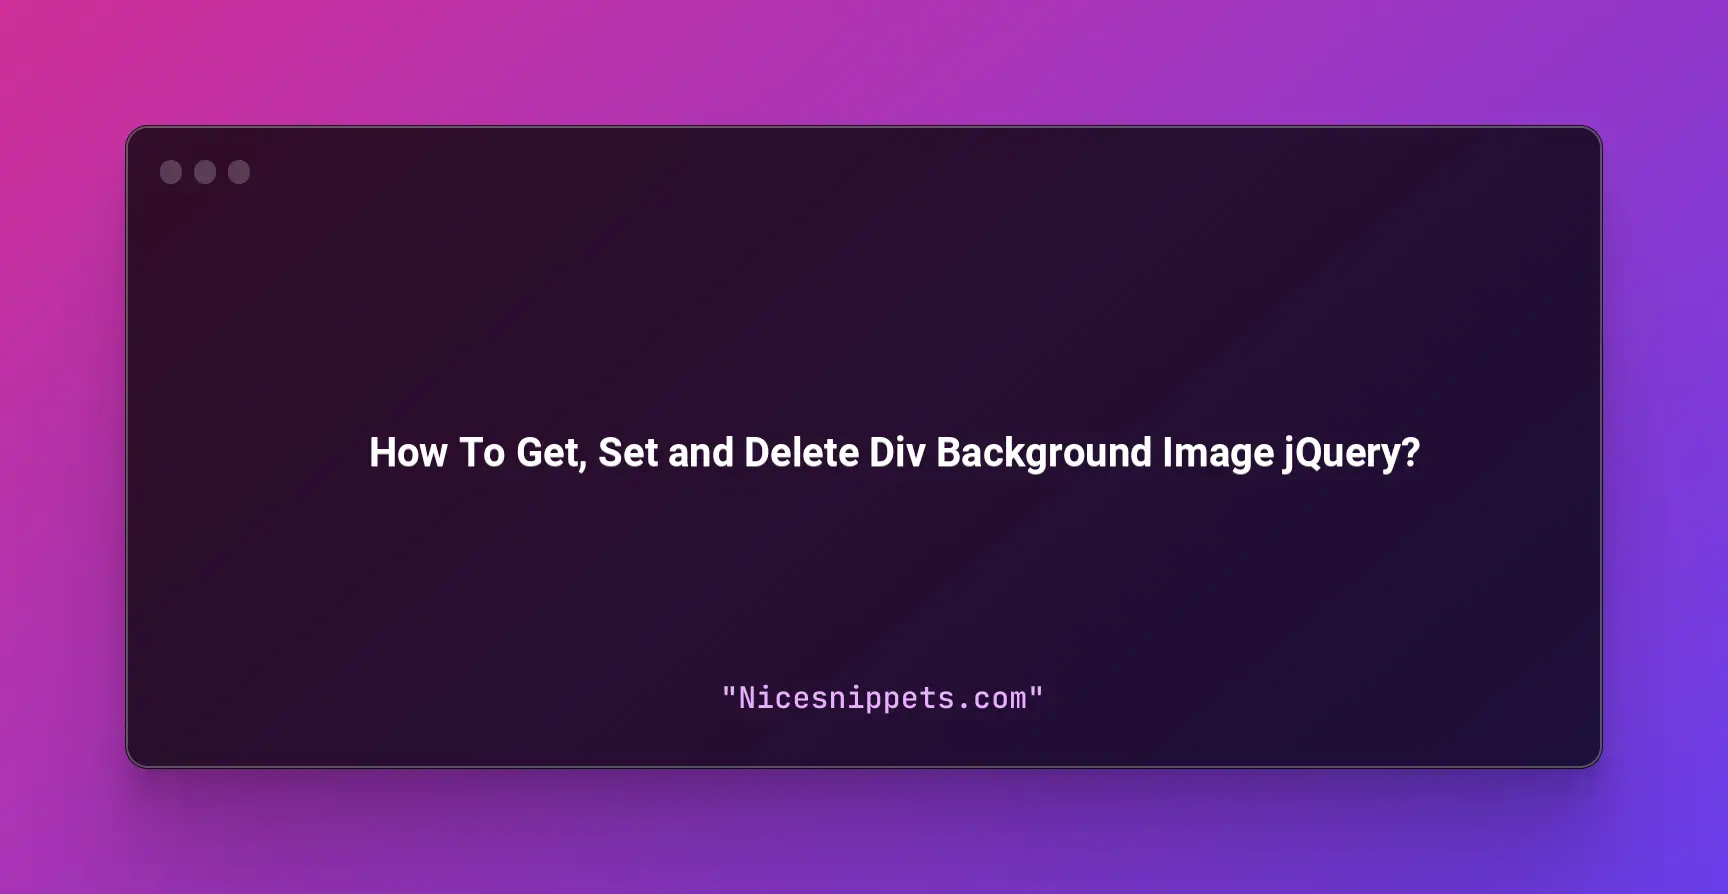 How To Get, Set and Delete Div Background Image jQuery?